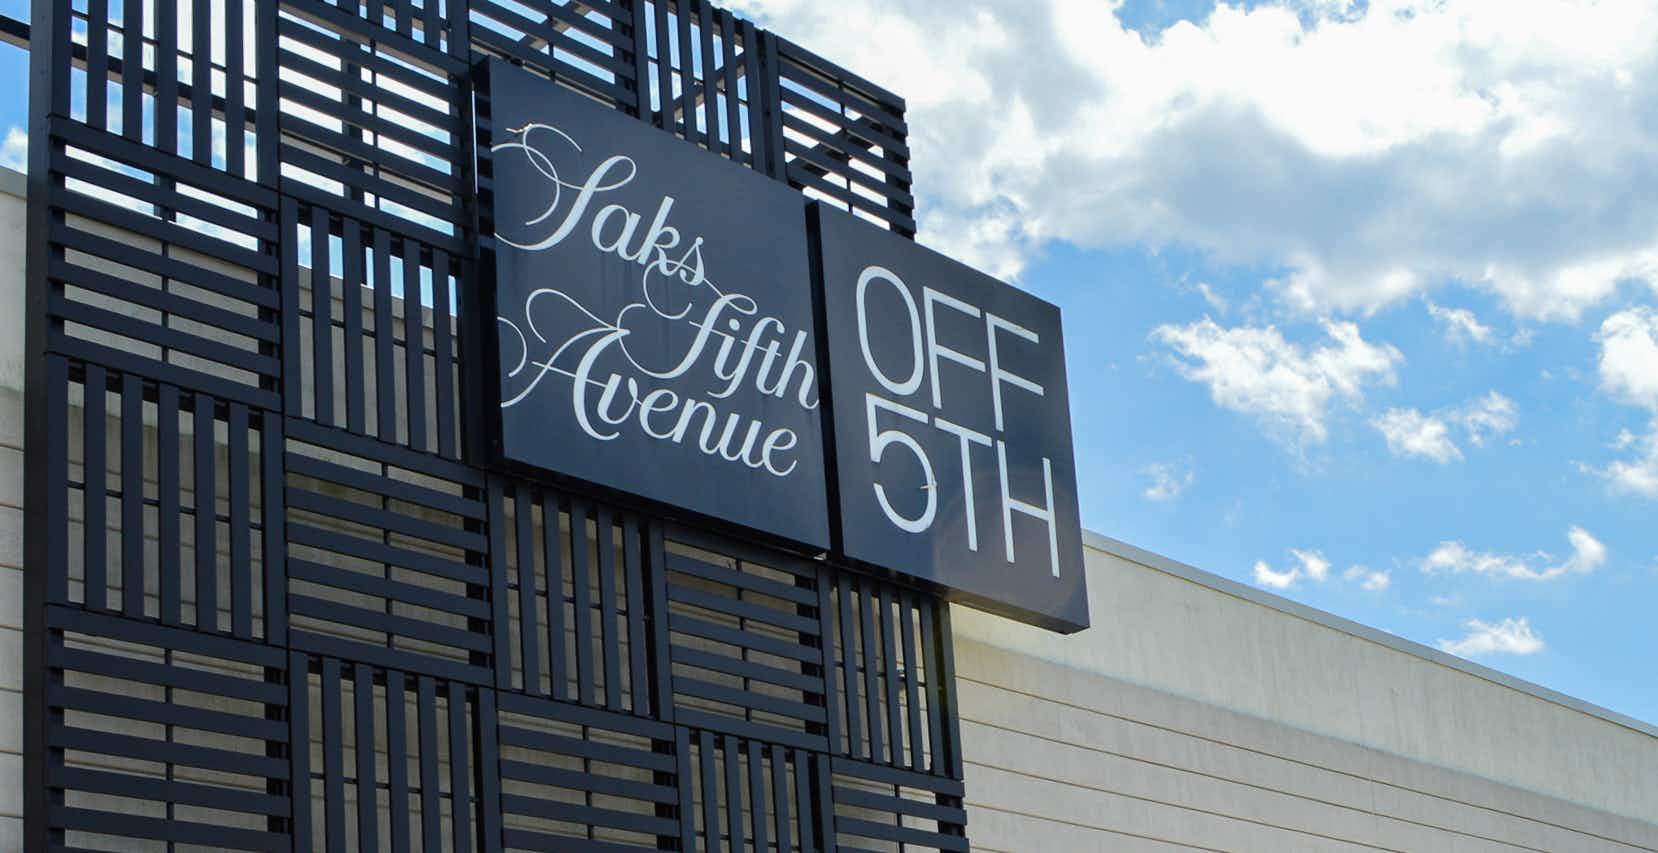 Saks OFF 5TH Cash Back Offers, Coupons & Black Friday Discounts